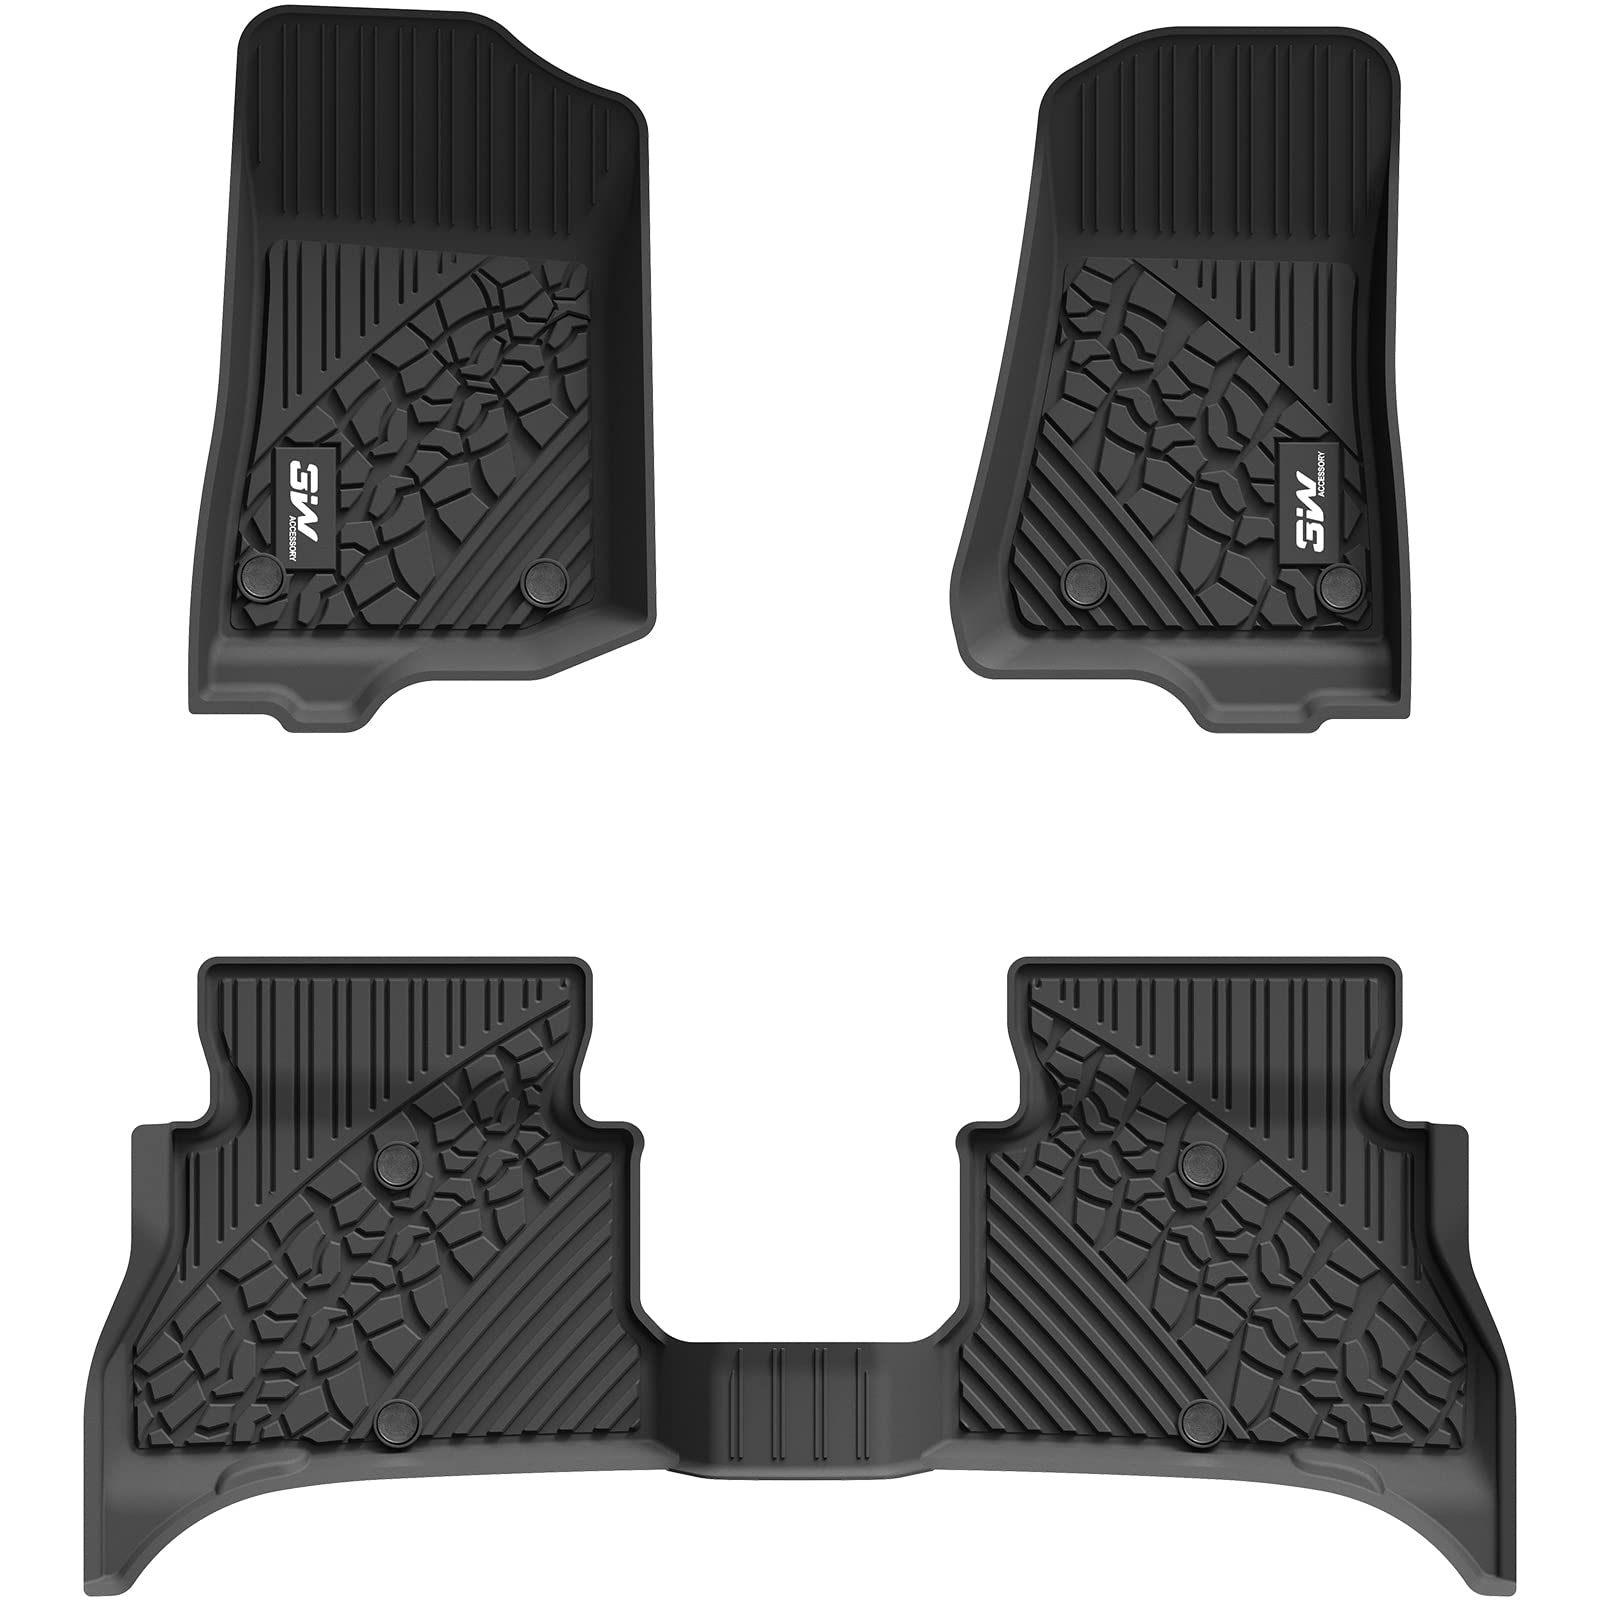 3W Jeep Wrangler 4XE Custom Floor Mats 2021-2024 Hybrid 4 Door TPE Material & All-Weather Protection Vehicles & Parts 3Wliners 2021-2024 Wrangler 4XE 2021-2024 1st&2nd Row Mats with White Logo